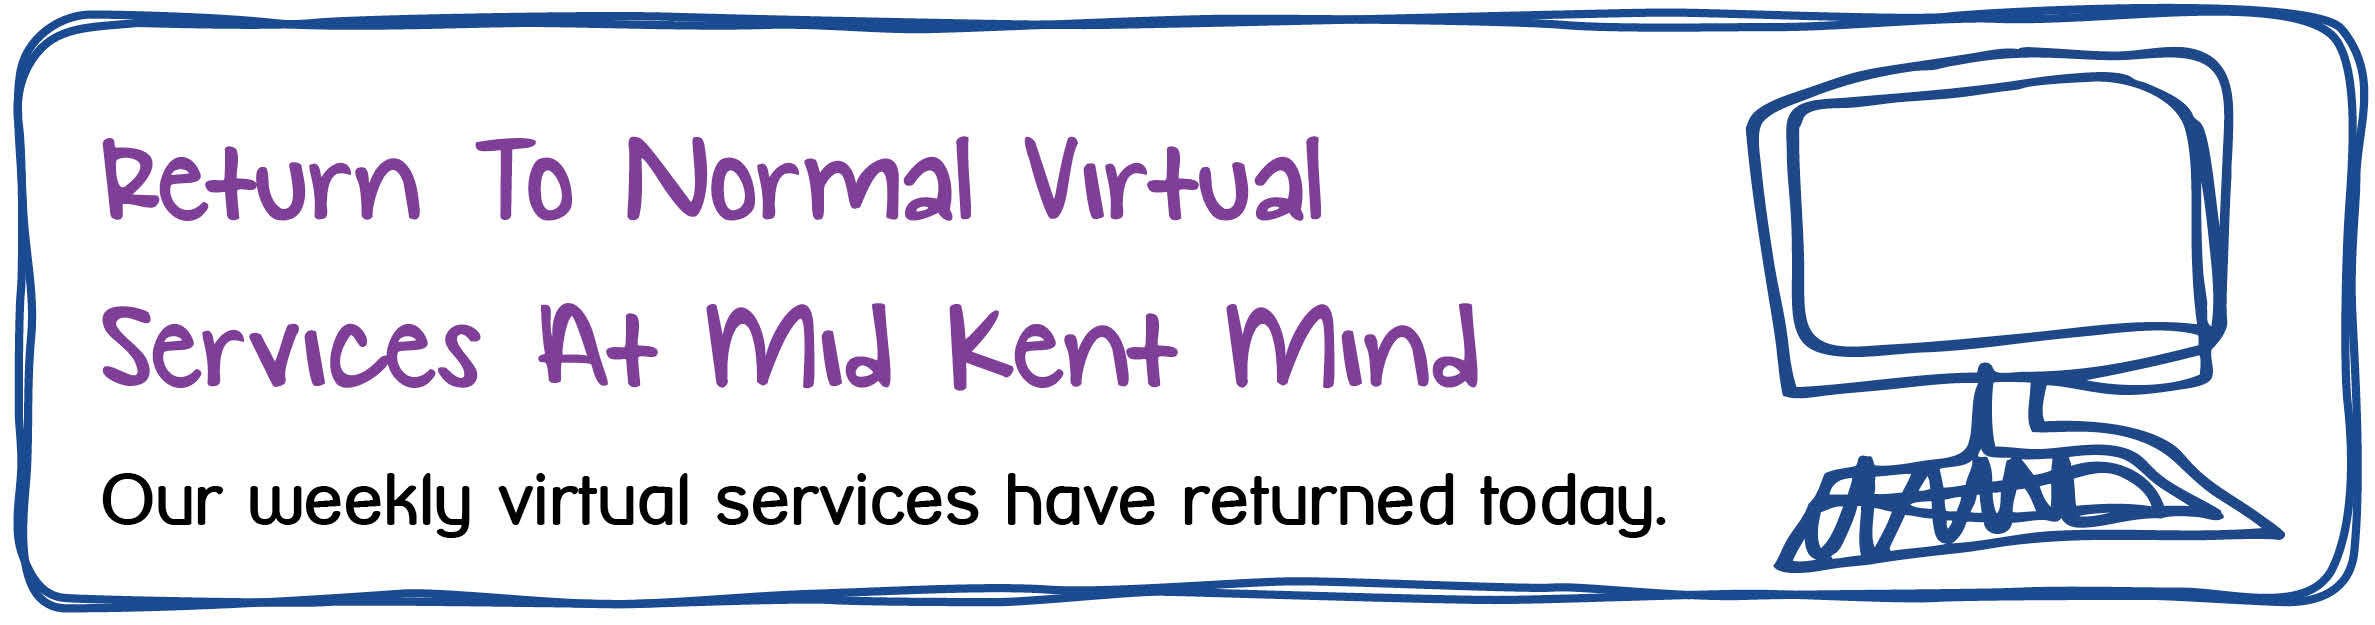 Return to Normal Virtual Services At Mid Kent Mind. Our weekly virtual services have returned today.